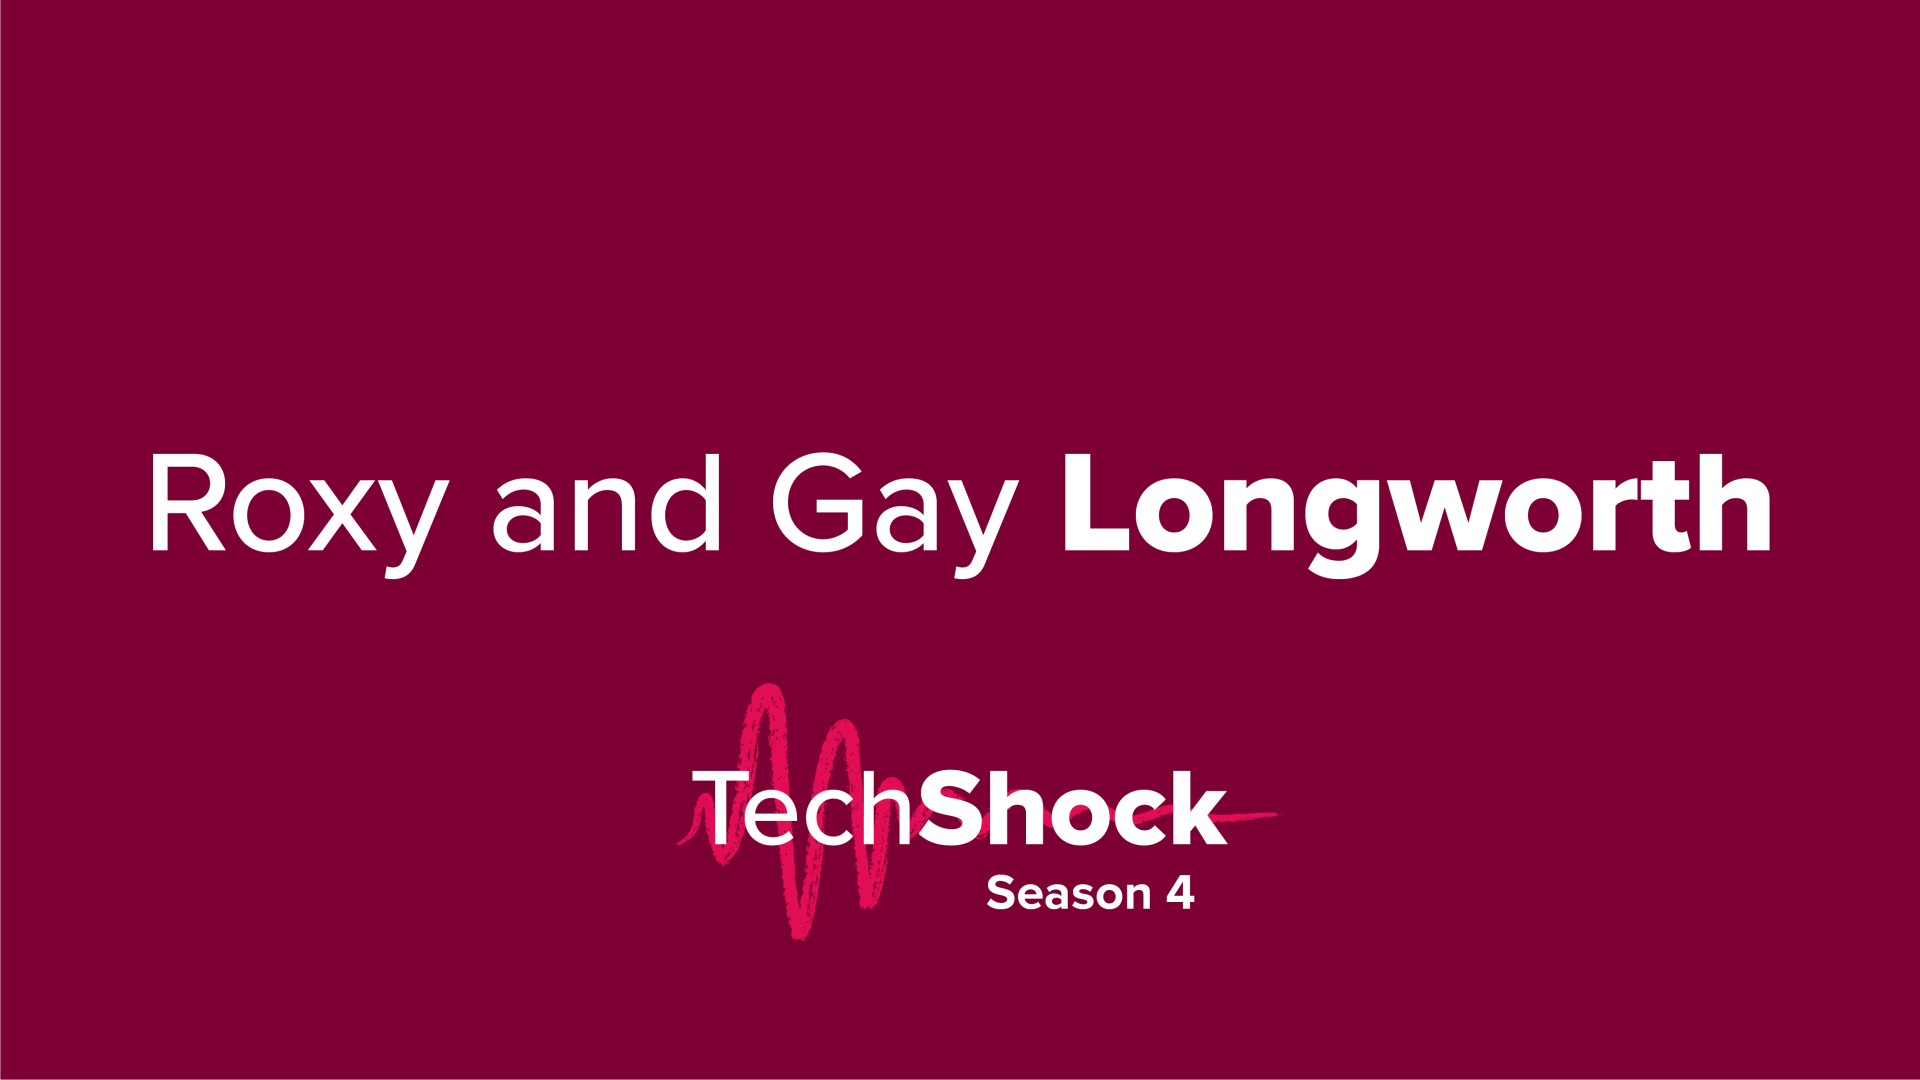 The Tech Shock Podcast - Roxy and Gay Longworth 